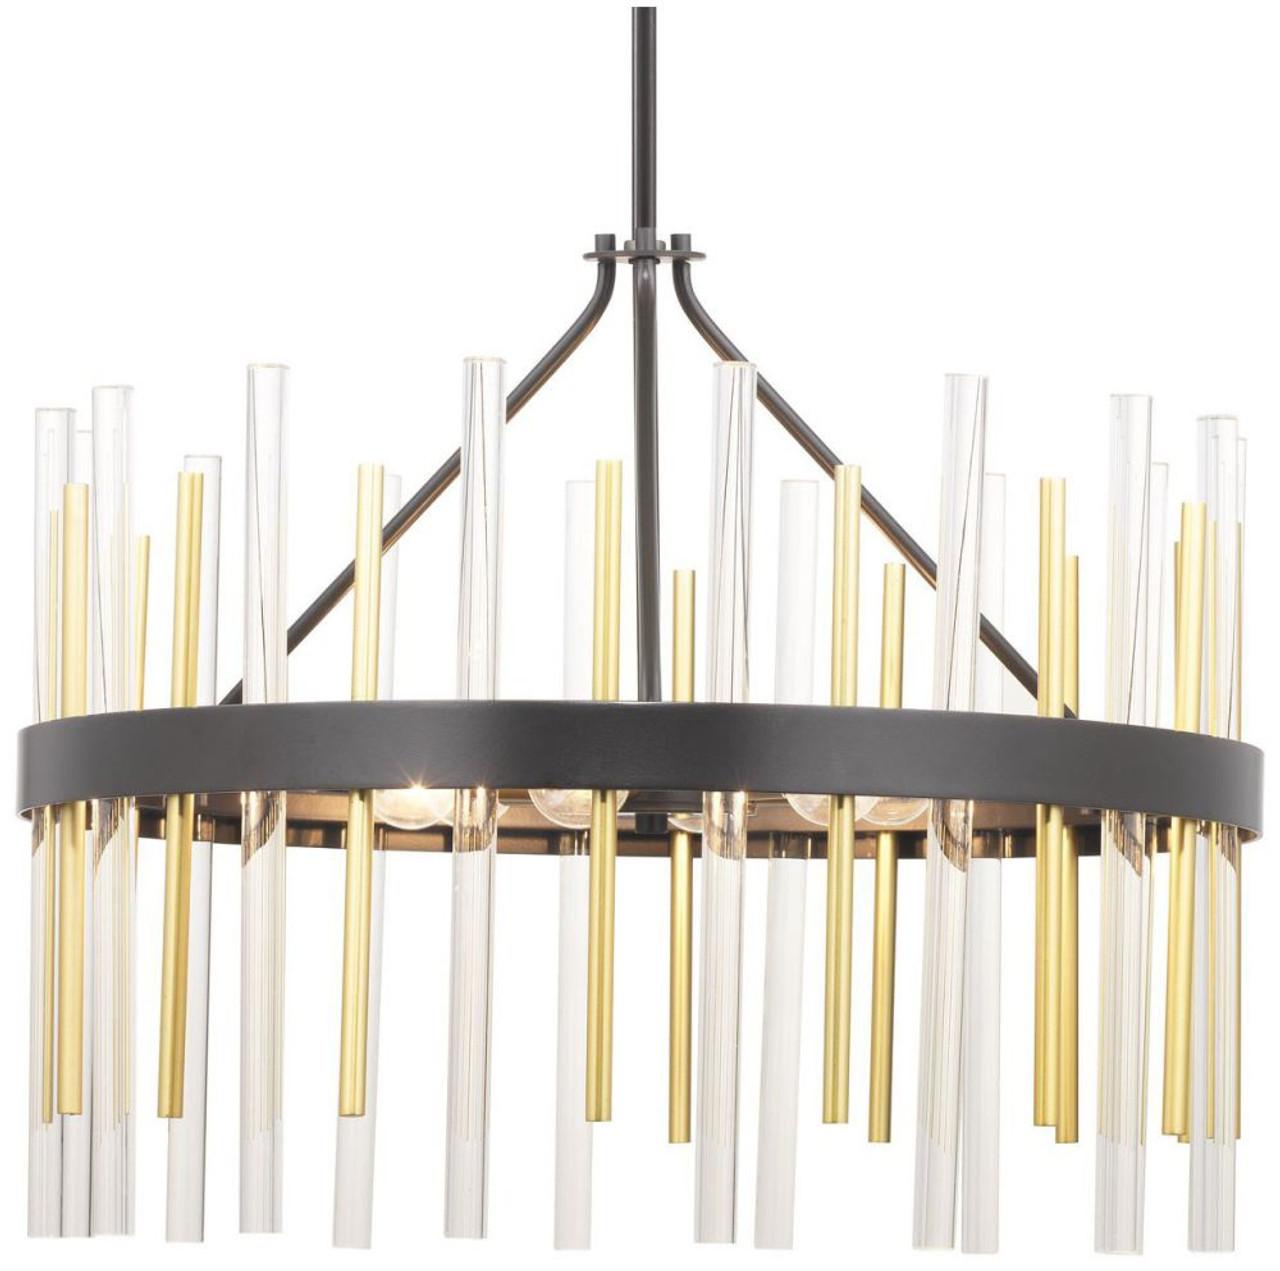 Hubbell P400176-031 Suitable for sleek and sophisticated interiors, the Orrizo Collection's six-light chandelier presents an artful arrangement of clear glass and golden metal rods that adorn a Black band. Geometric and artisan design influences complement both Modern and Lu